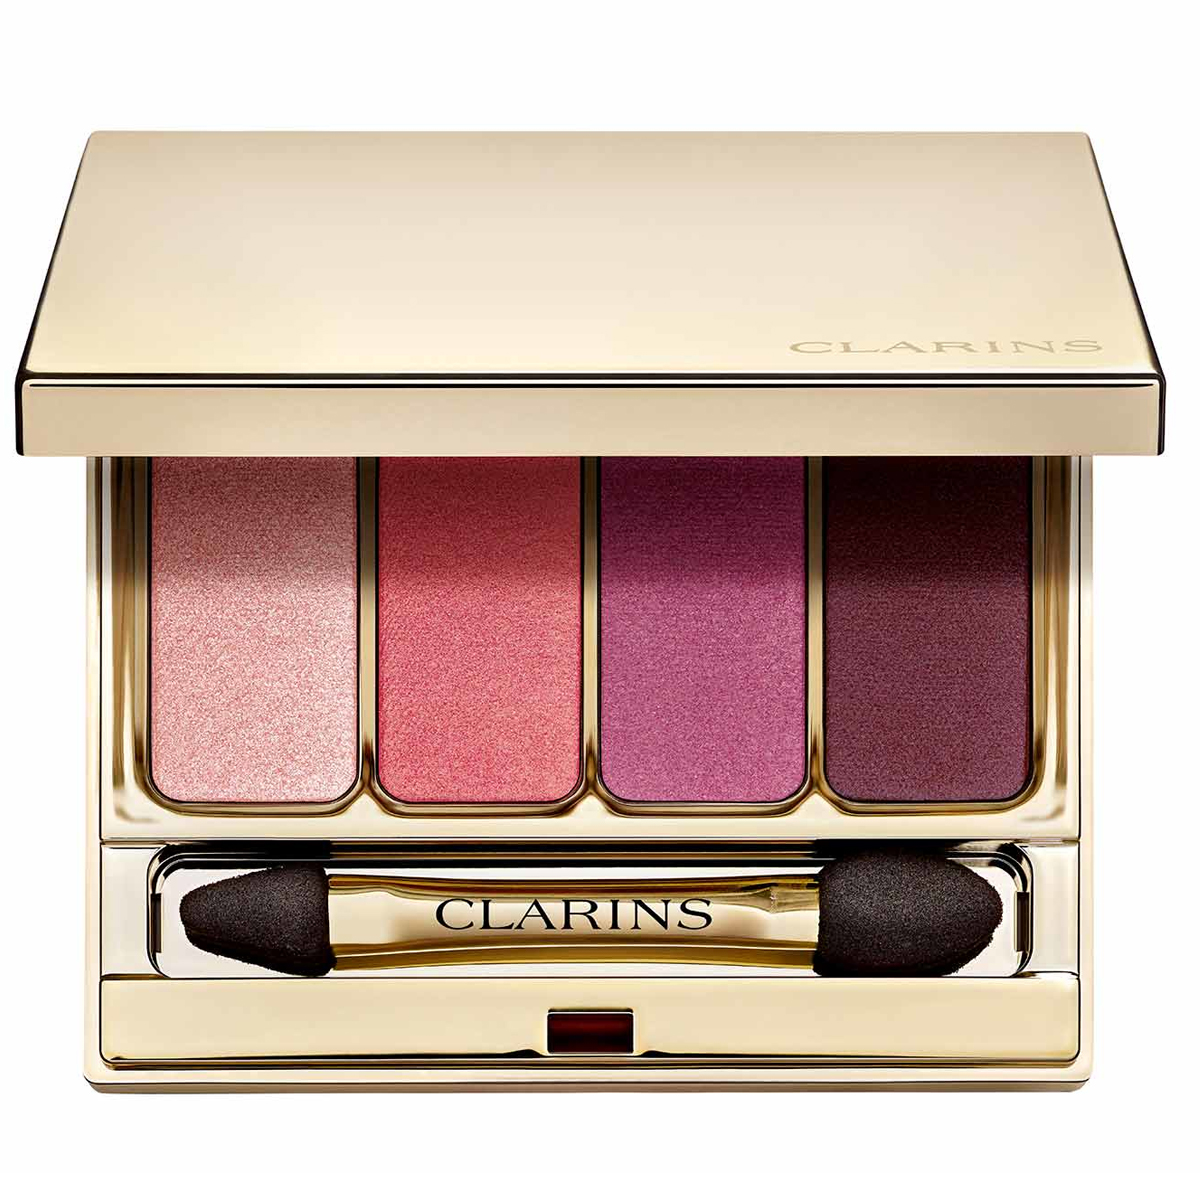 Clarins 4 Colour Eyeshadow Palette 07 Lovely Rose